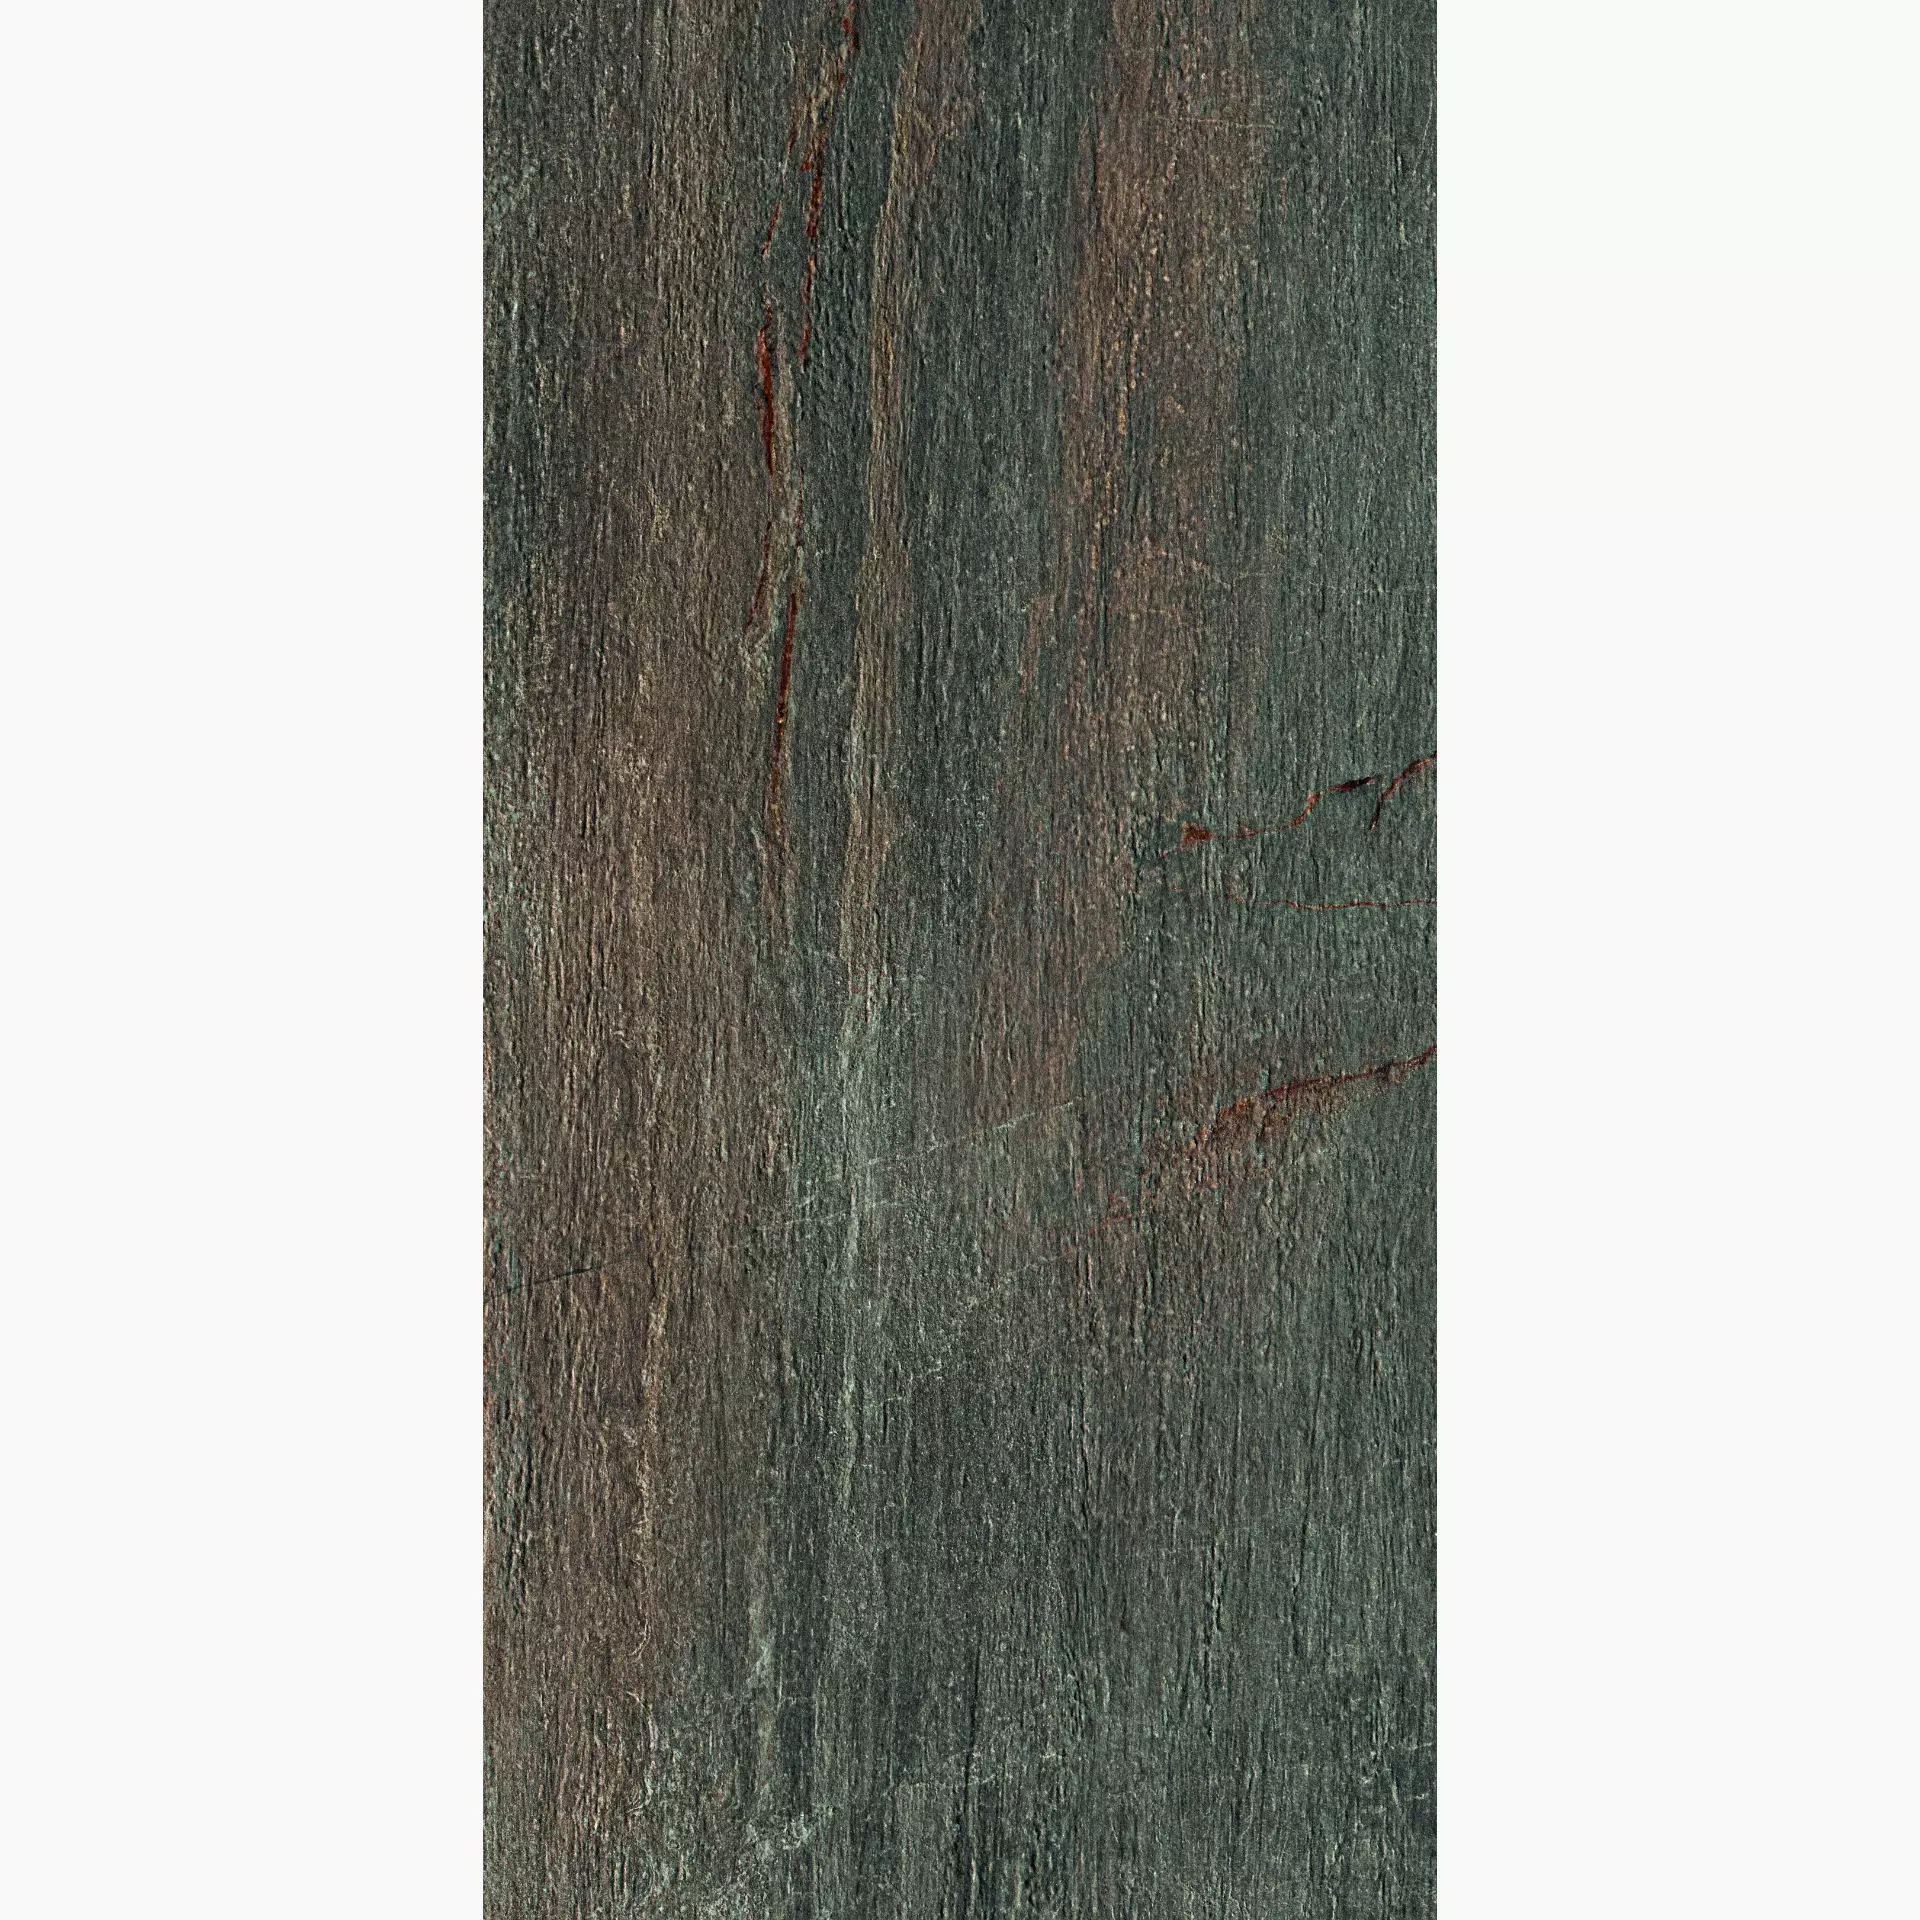 Serenissima Fossil Bruno Naturale 1066586 30x60cm rectified 9,5mm